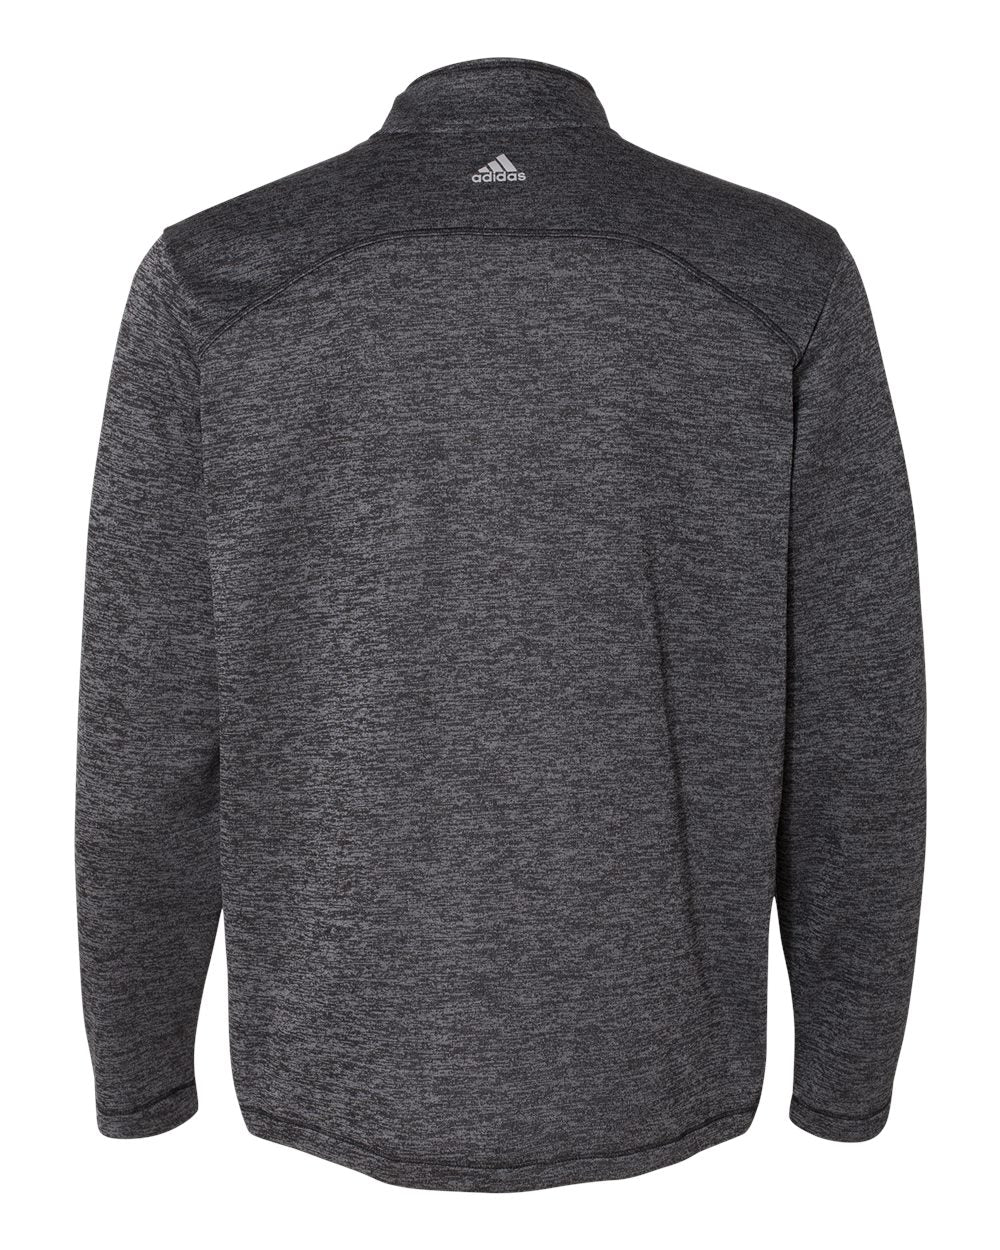 CIFA Adidas Brushed Terry Quarter-Zip Pullover